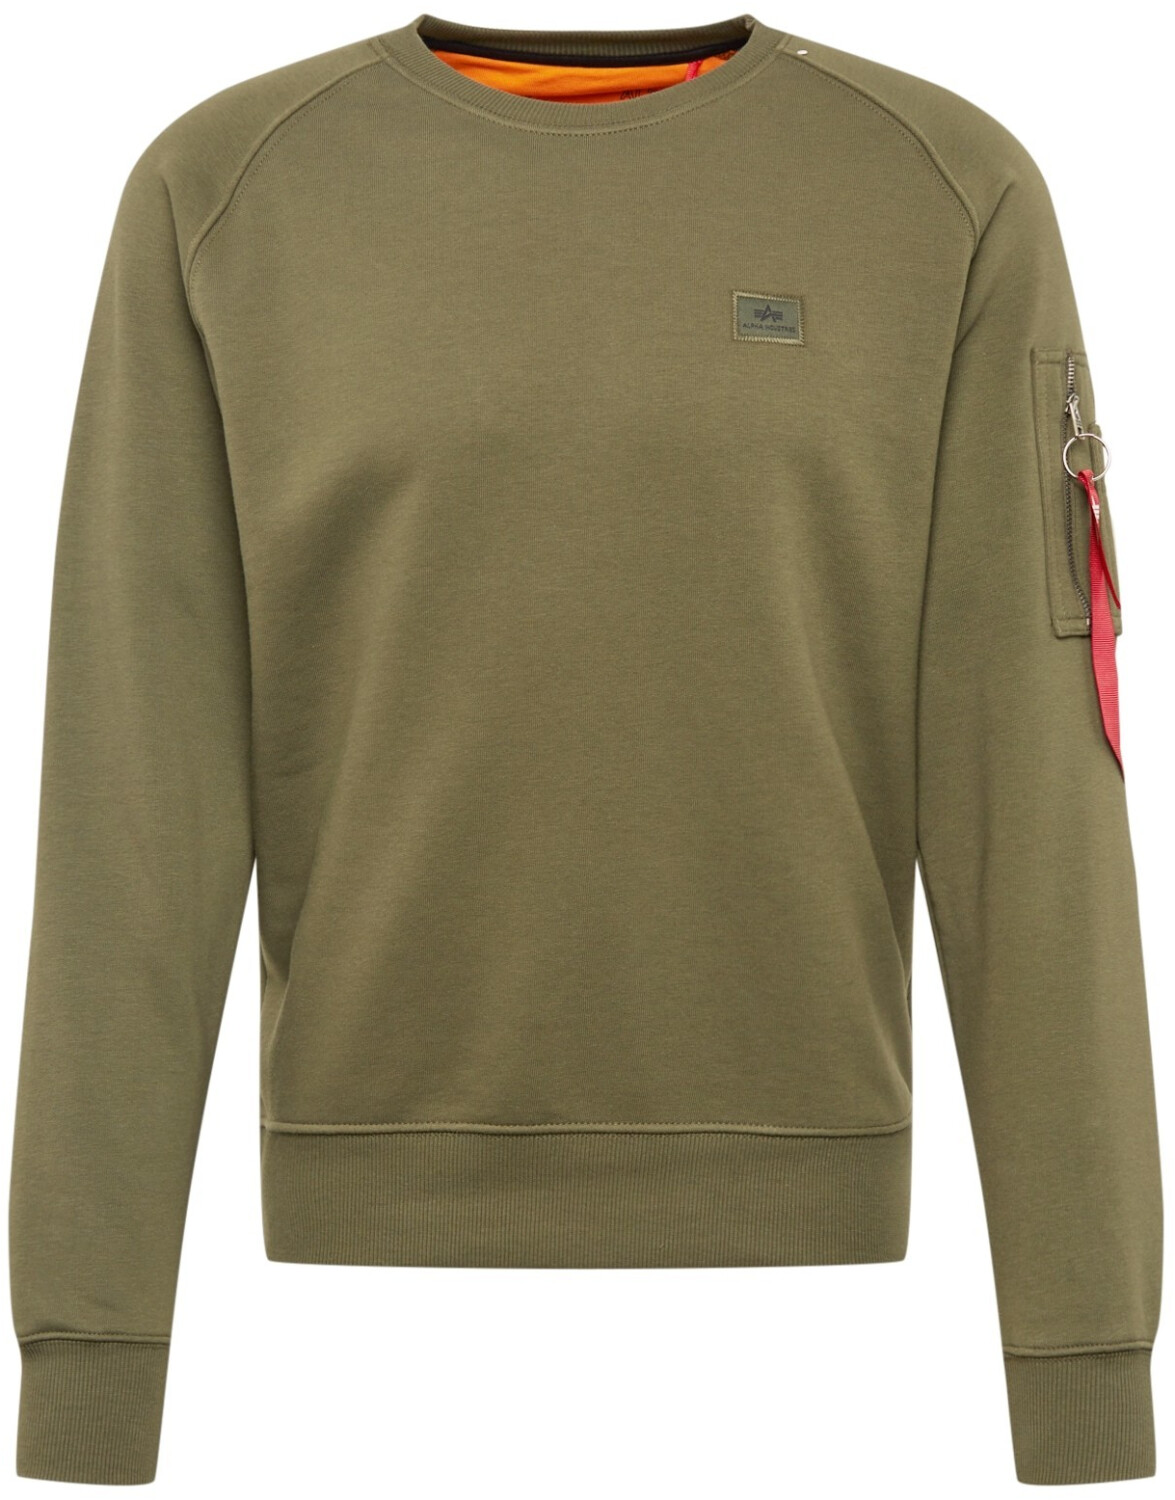 Alpha Industries X-Fit Sweat Pull Hommes Sweater Pull 158320 Gris Nouveau